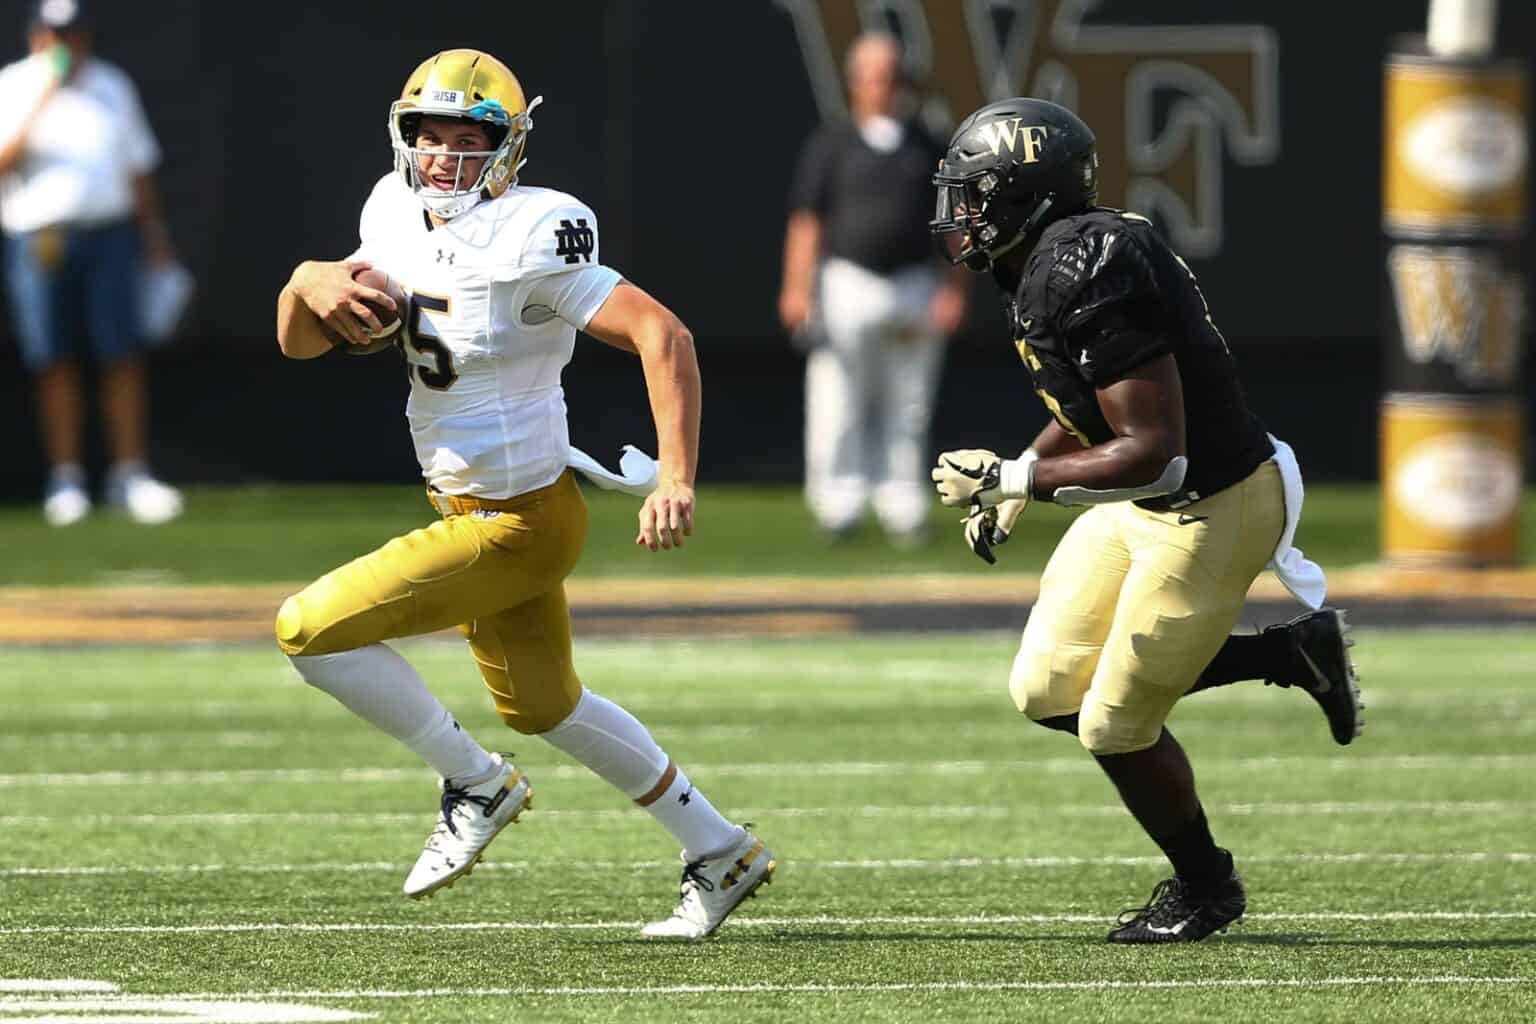 2020 Notre DameWake Forest football game moved to Truist Field